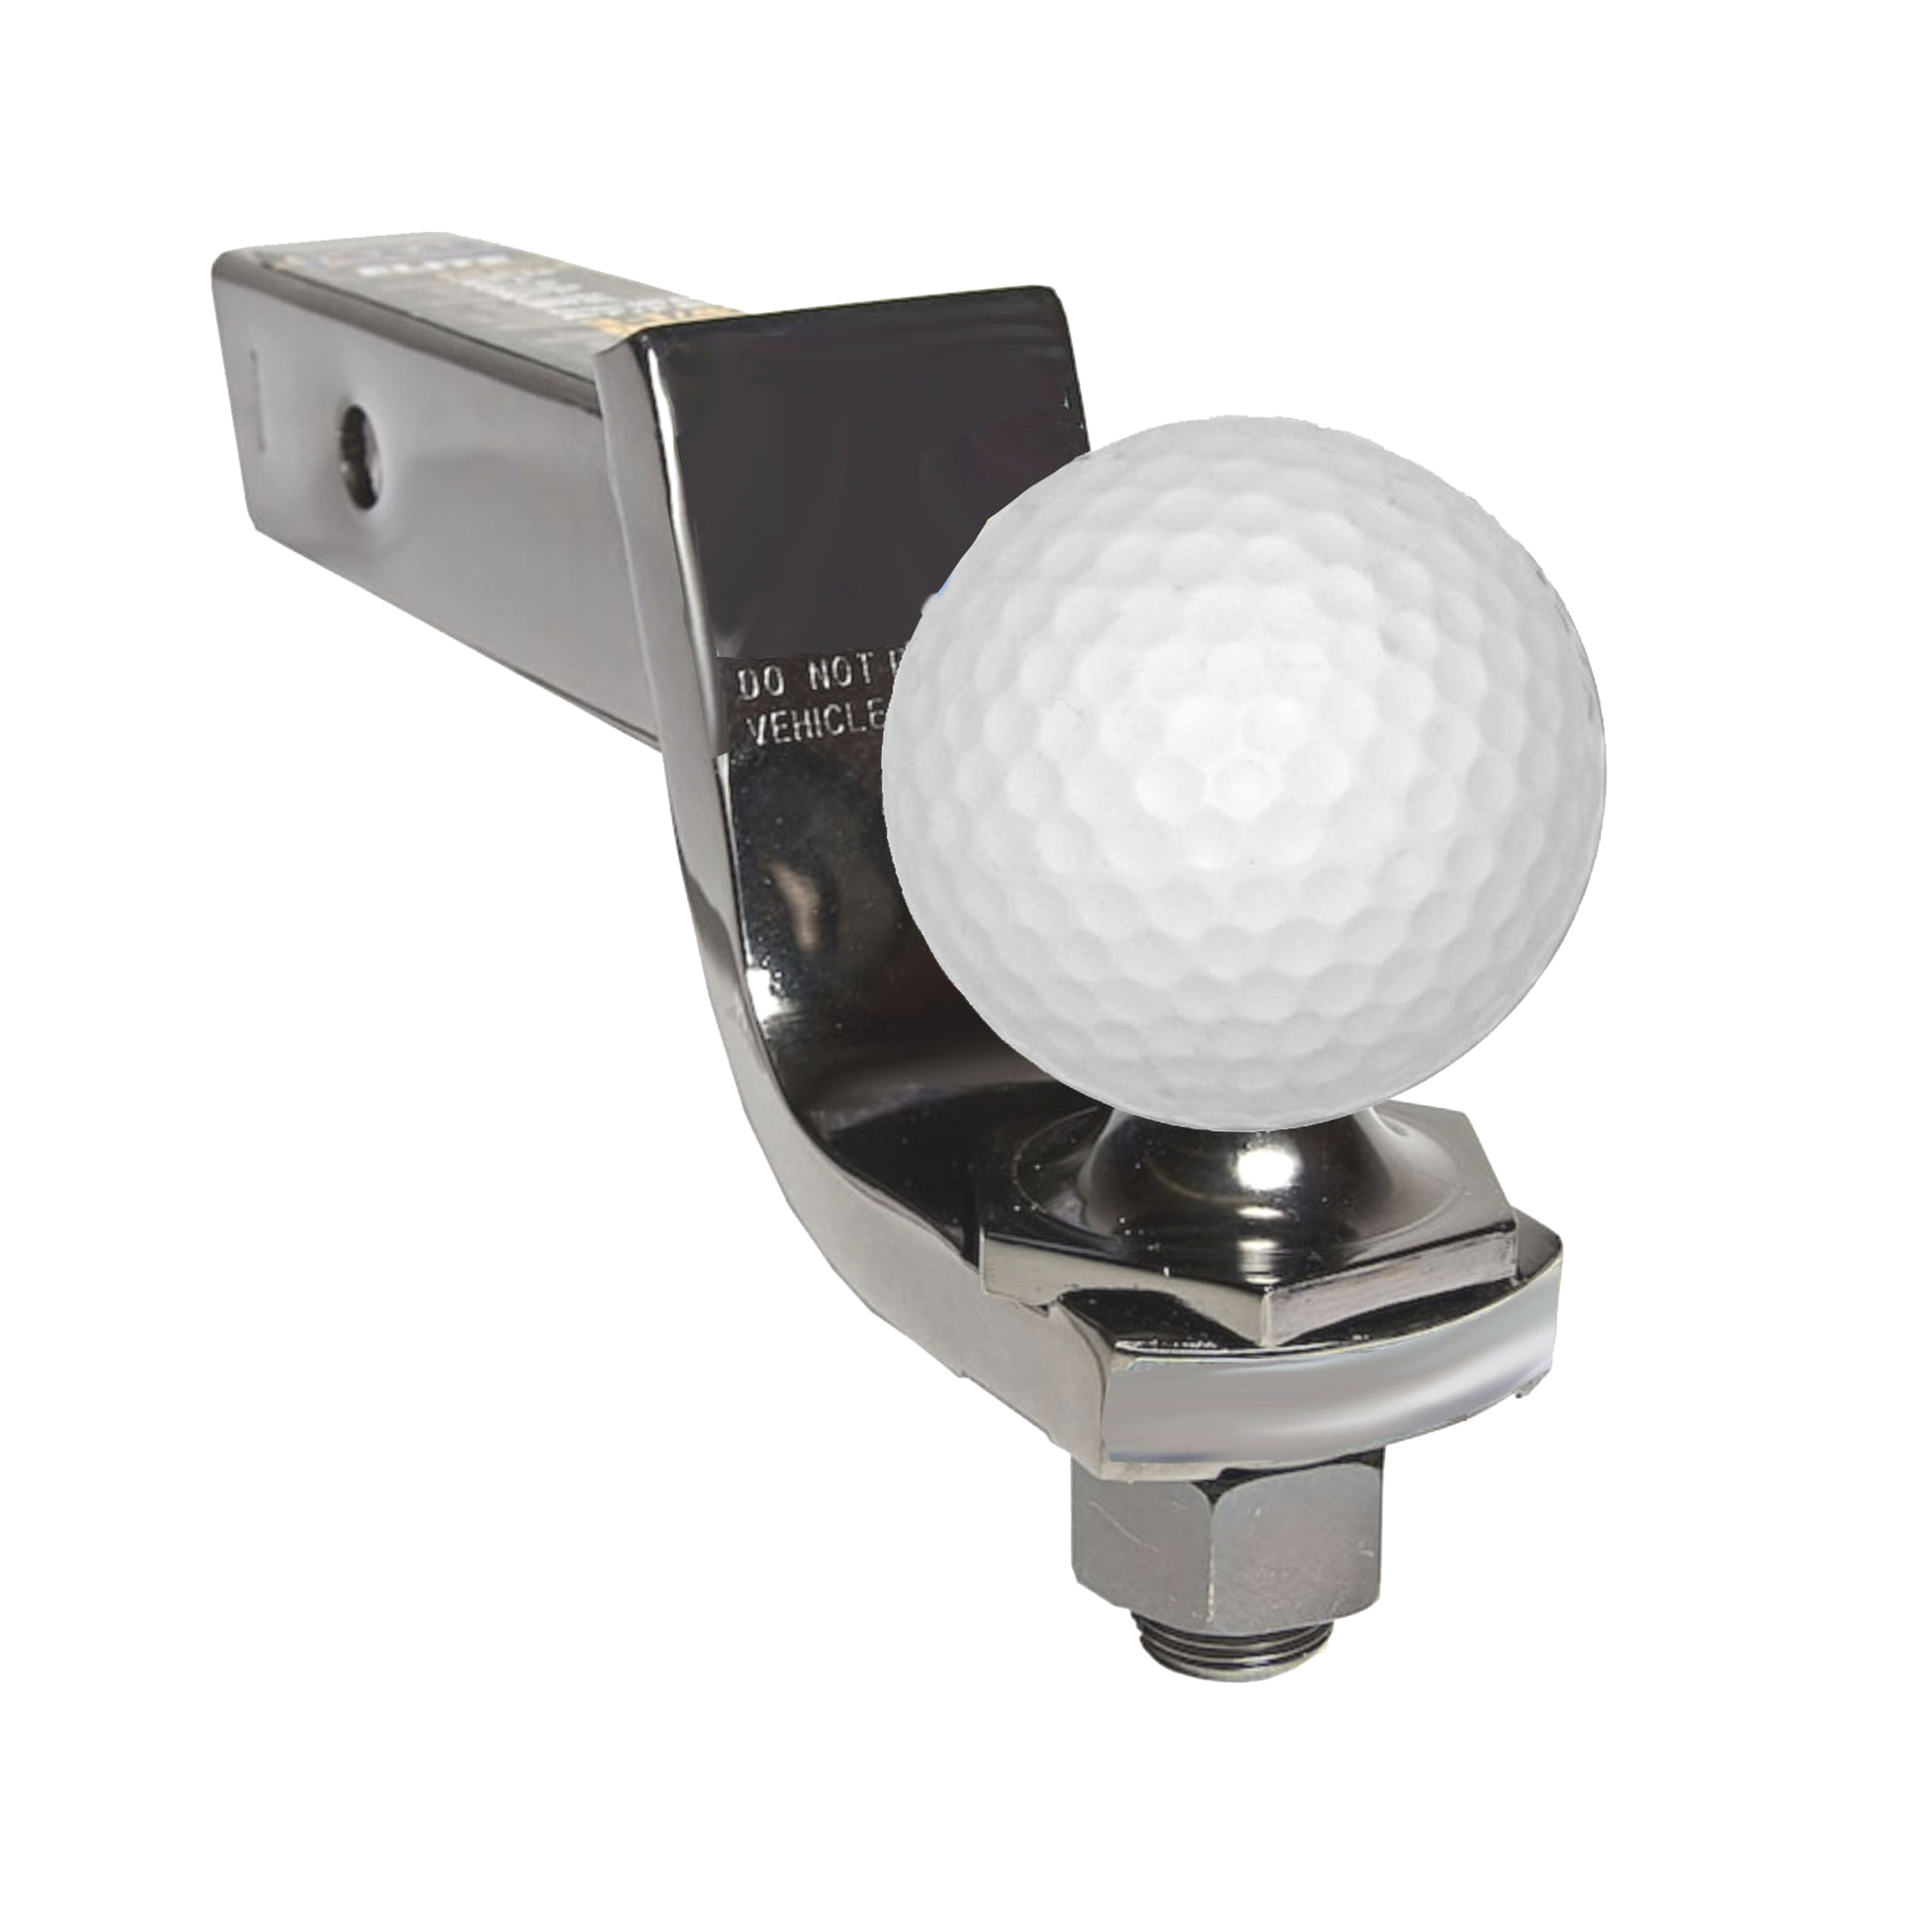 Bully Golf Ball Hitch Cover - Fits 1 7/8" or 2"